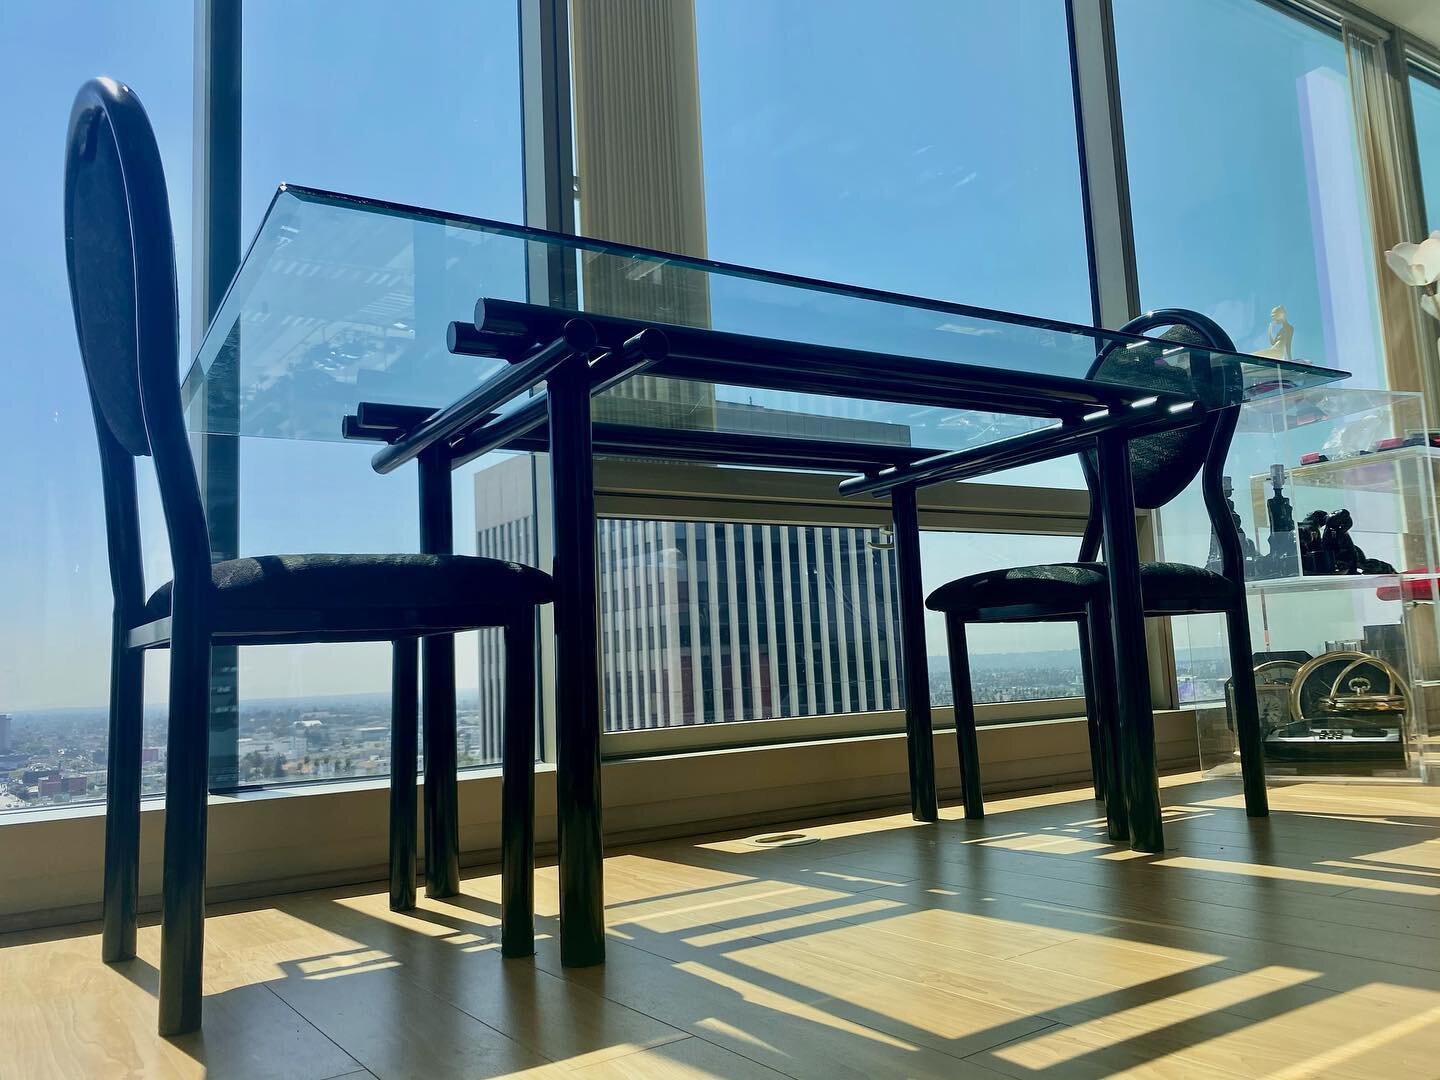 ((Pending))Officially obsessed with glass this week! Check out this awesome, abstract, post modern dining table! Full size dining table with 4 chairs. Whole set: $550

Measurements:
Glass top: 60&rdquo;x40&rdquo;
Table height: 30.5&rdquo;

Available 